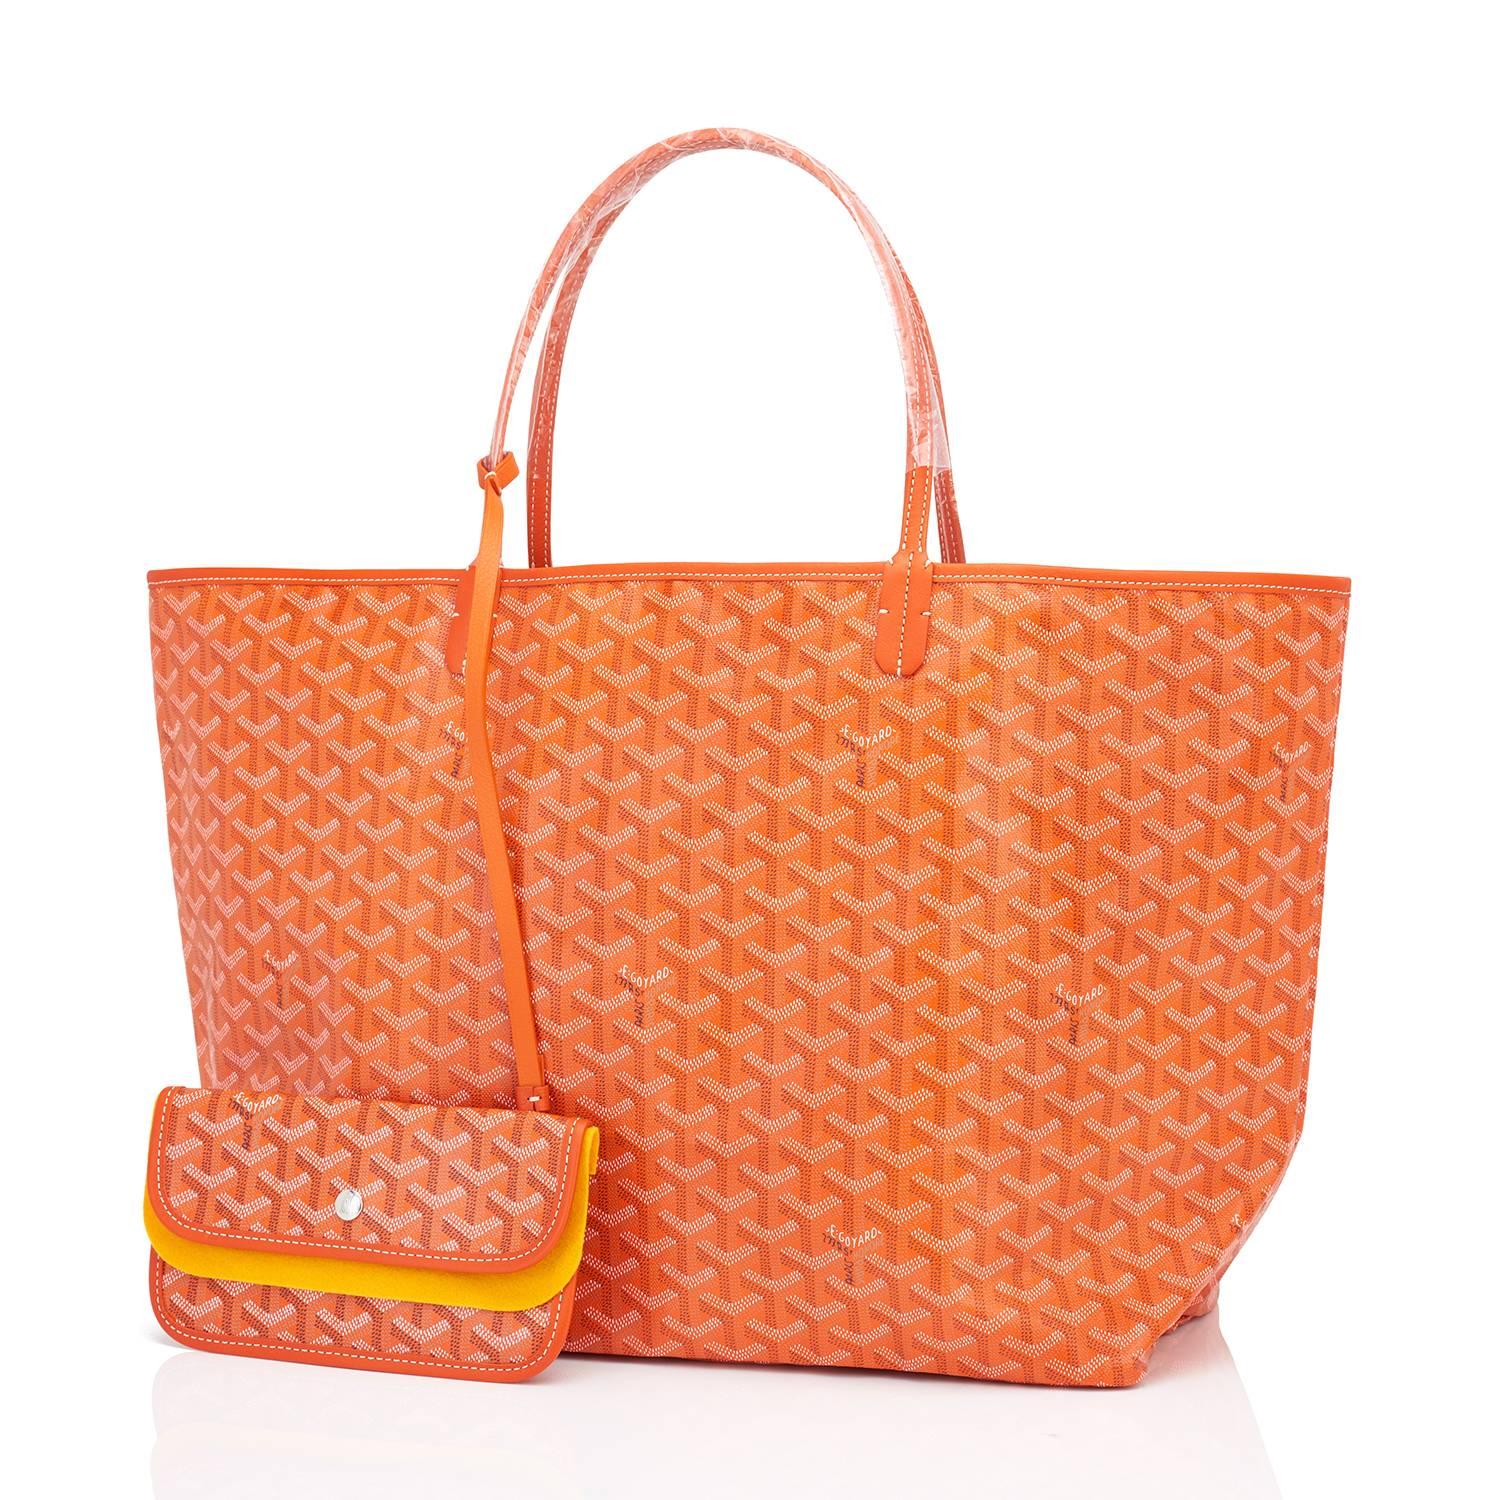 Goyard Orange St Louis GM Chevron Tote Bag 
Just purchased from store in 2021!
Brand New. Store Fresh. Pristine Condition (with plastic on handles) 
Perfect gift! Comes with yellow Goyard sleeper, inner organizational pochette, and yellow protective